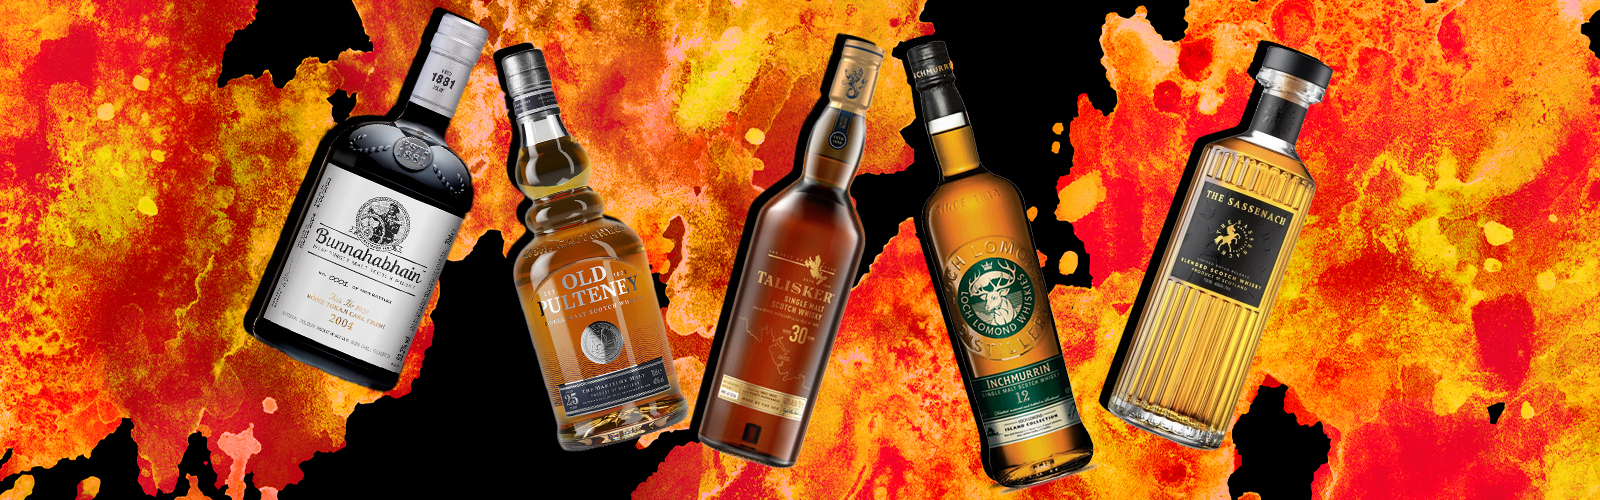 7 Indian whisky brands under ₹1000 to try if you're on a budget | GQ India